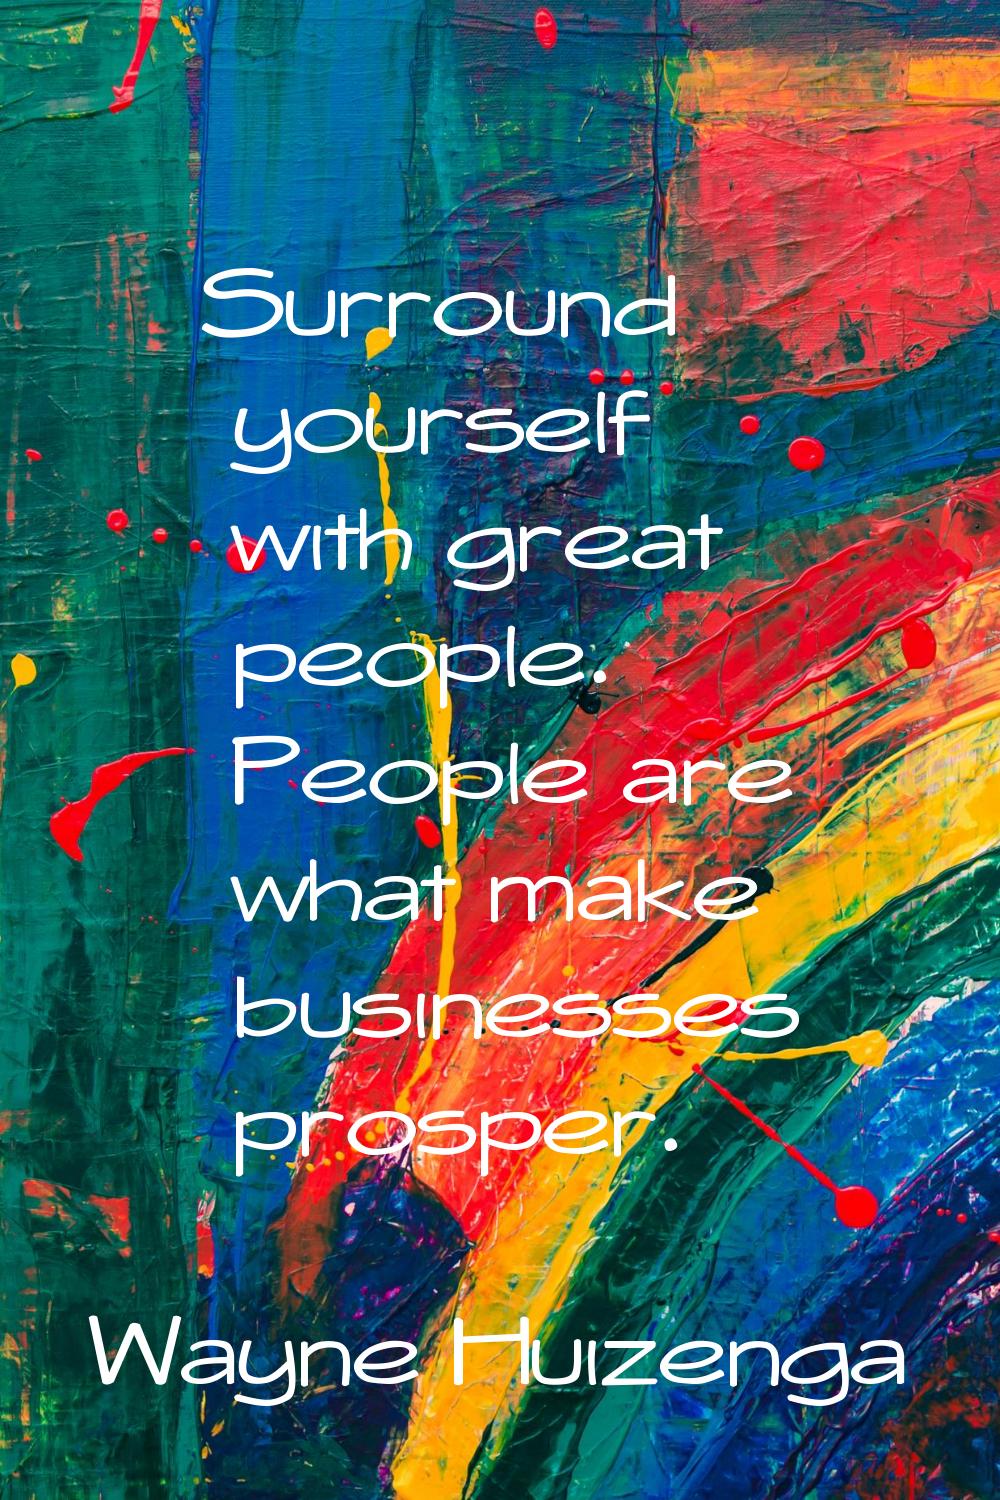 Surround yourself with great people. People are what make businesses prosper.